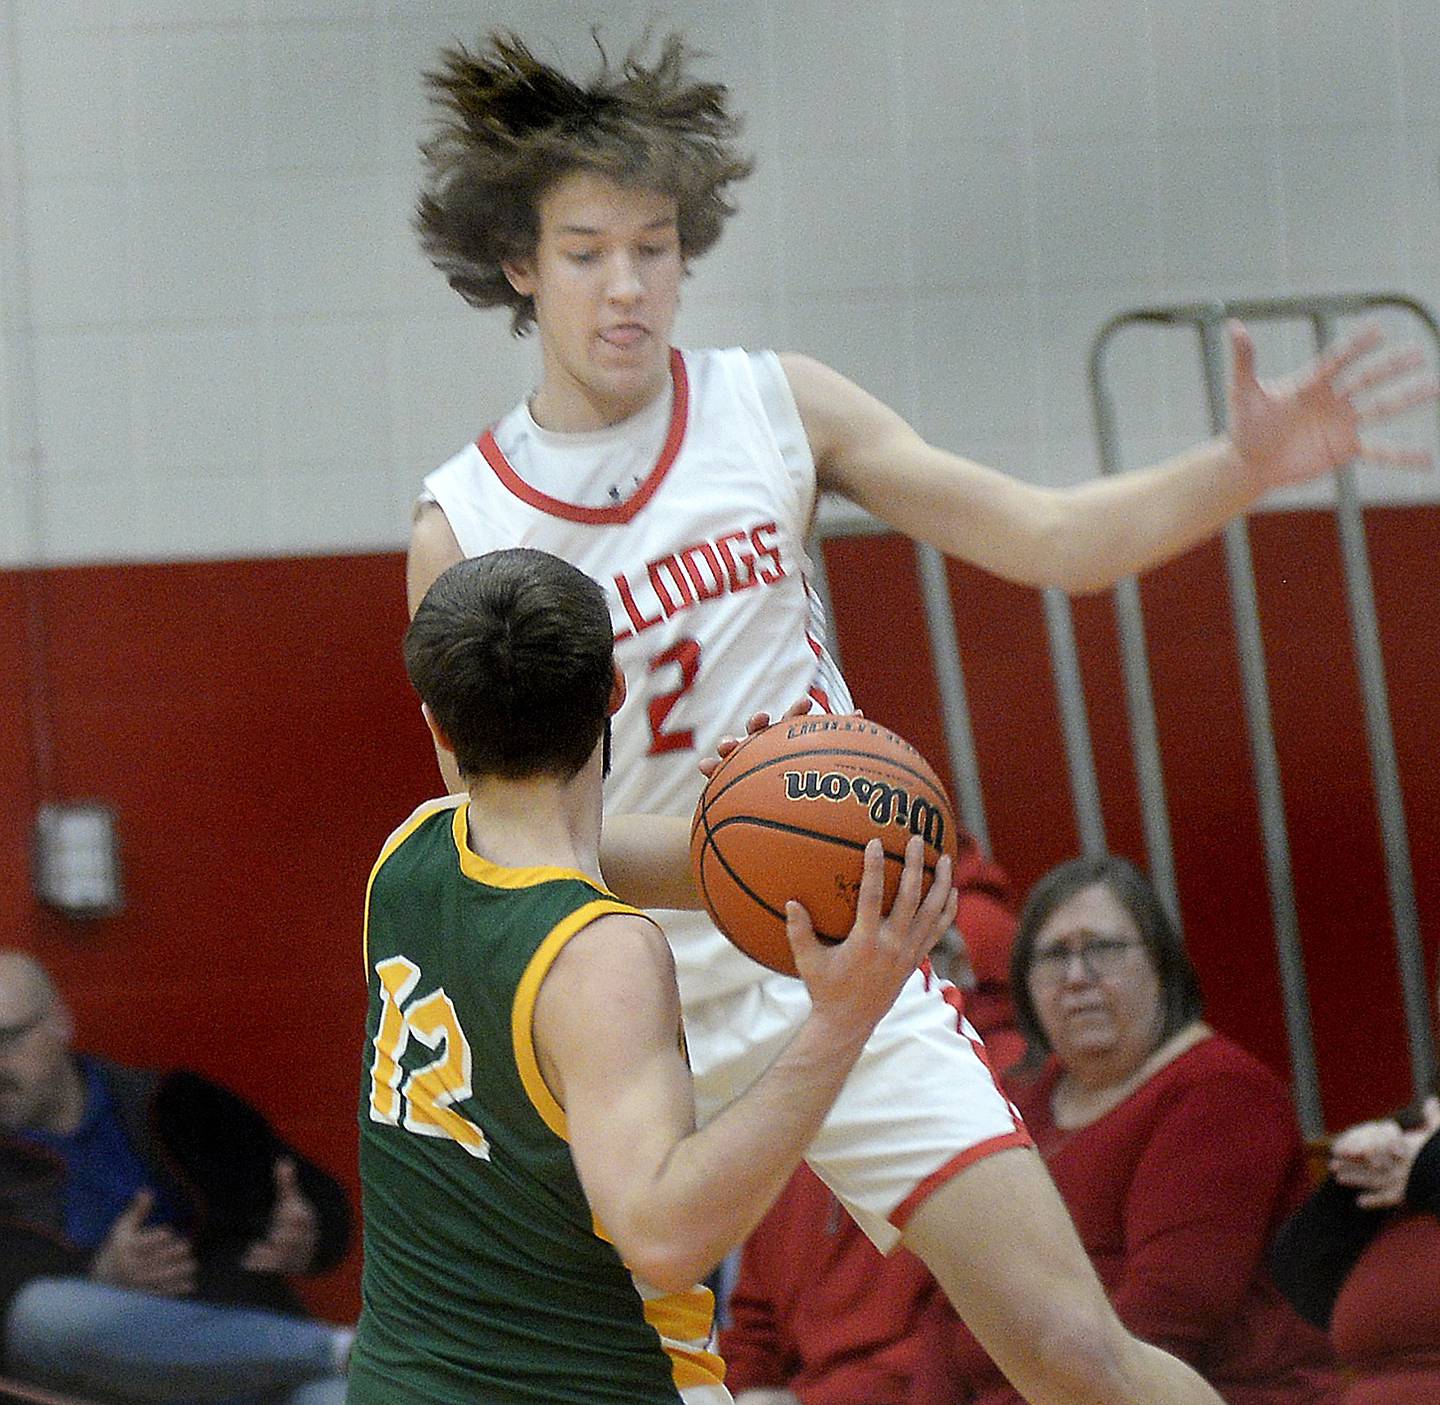 Streator’s Matt Williamson leaps to block a pass by Coal City’s Carson Shepard in the 2nd period on Tuesday, Jan. 31, 2023 at Streator High School.